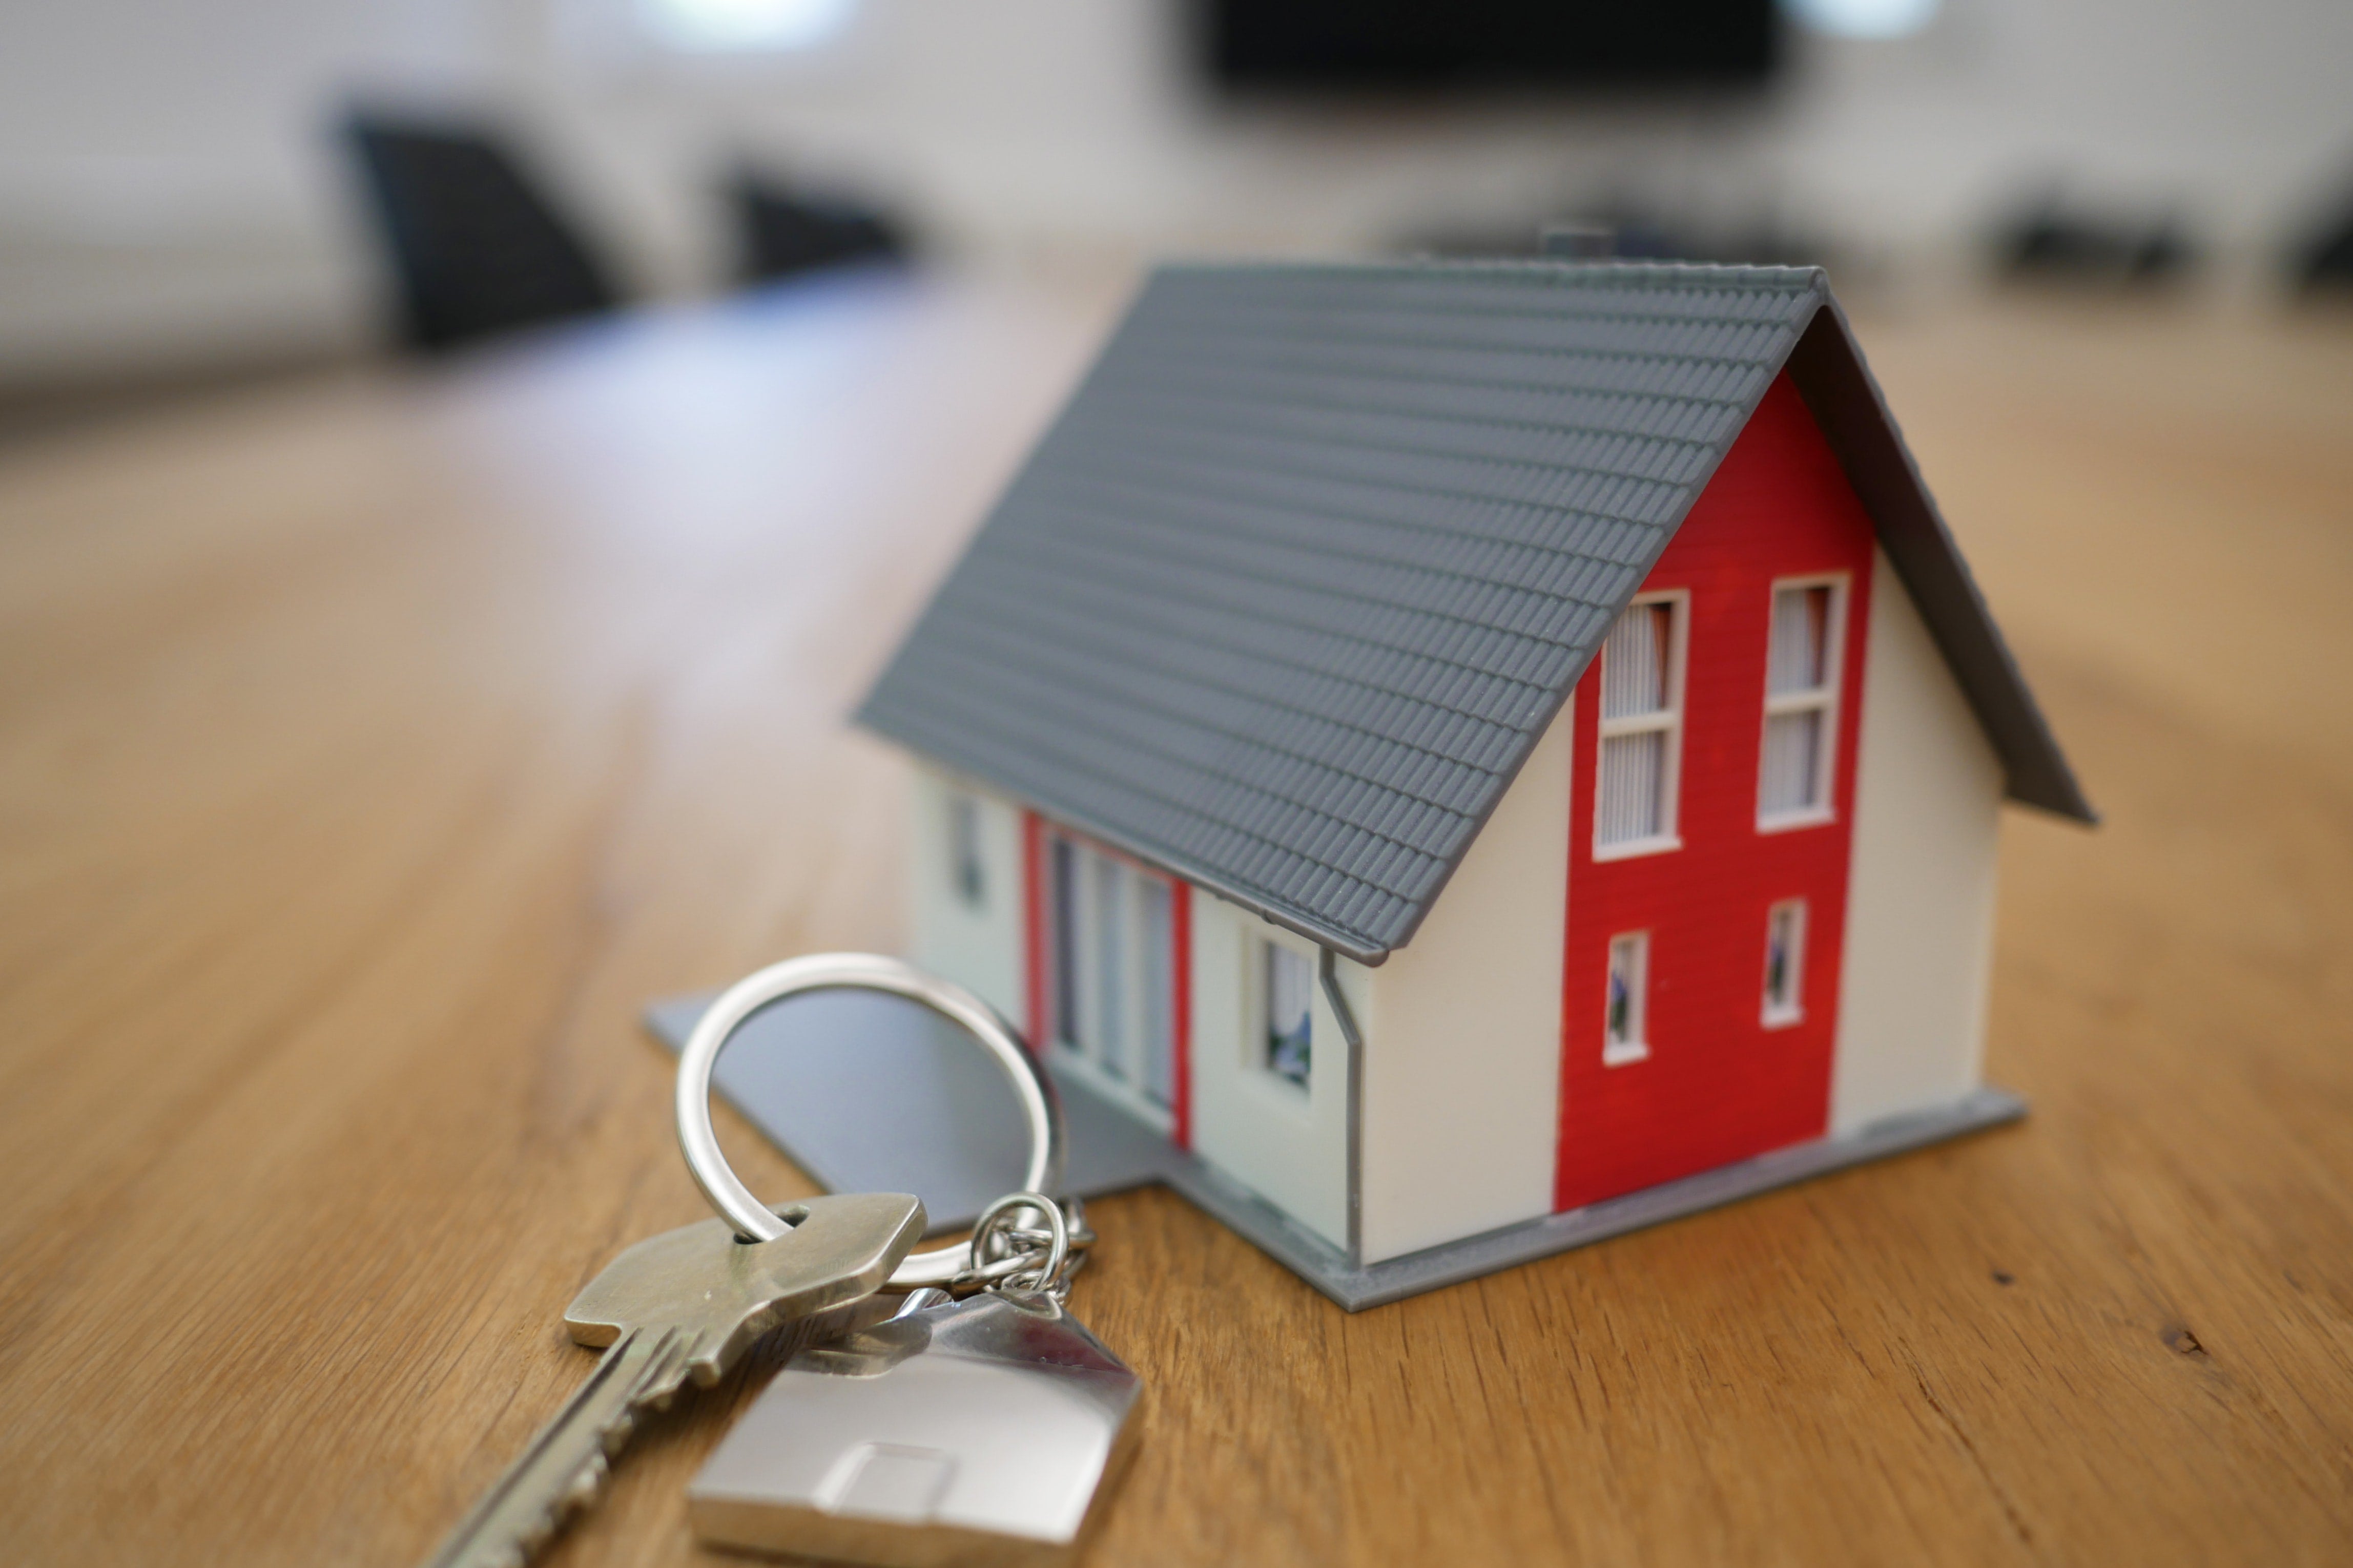 A keychain with a key on it next to a small model of a house.